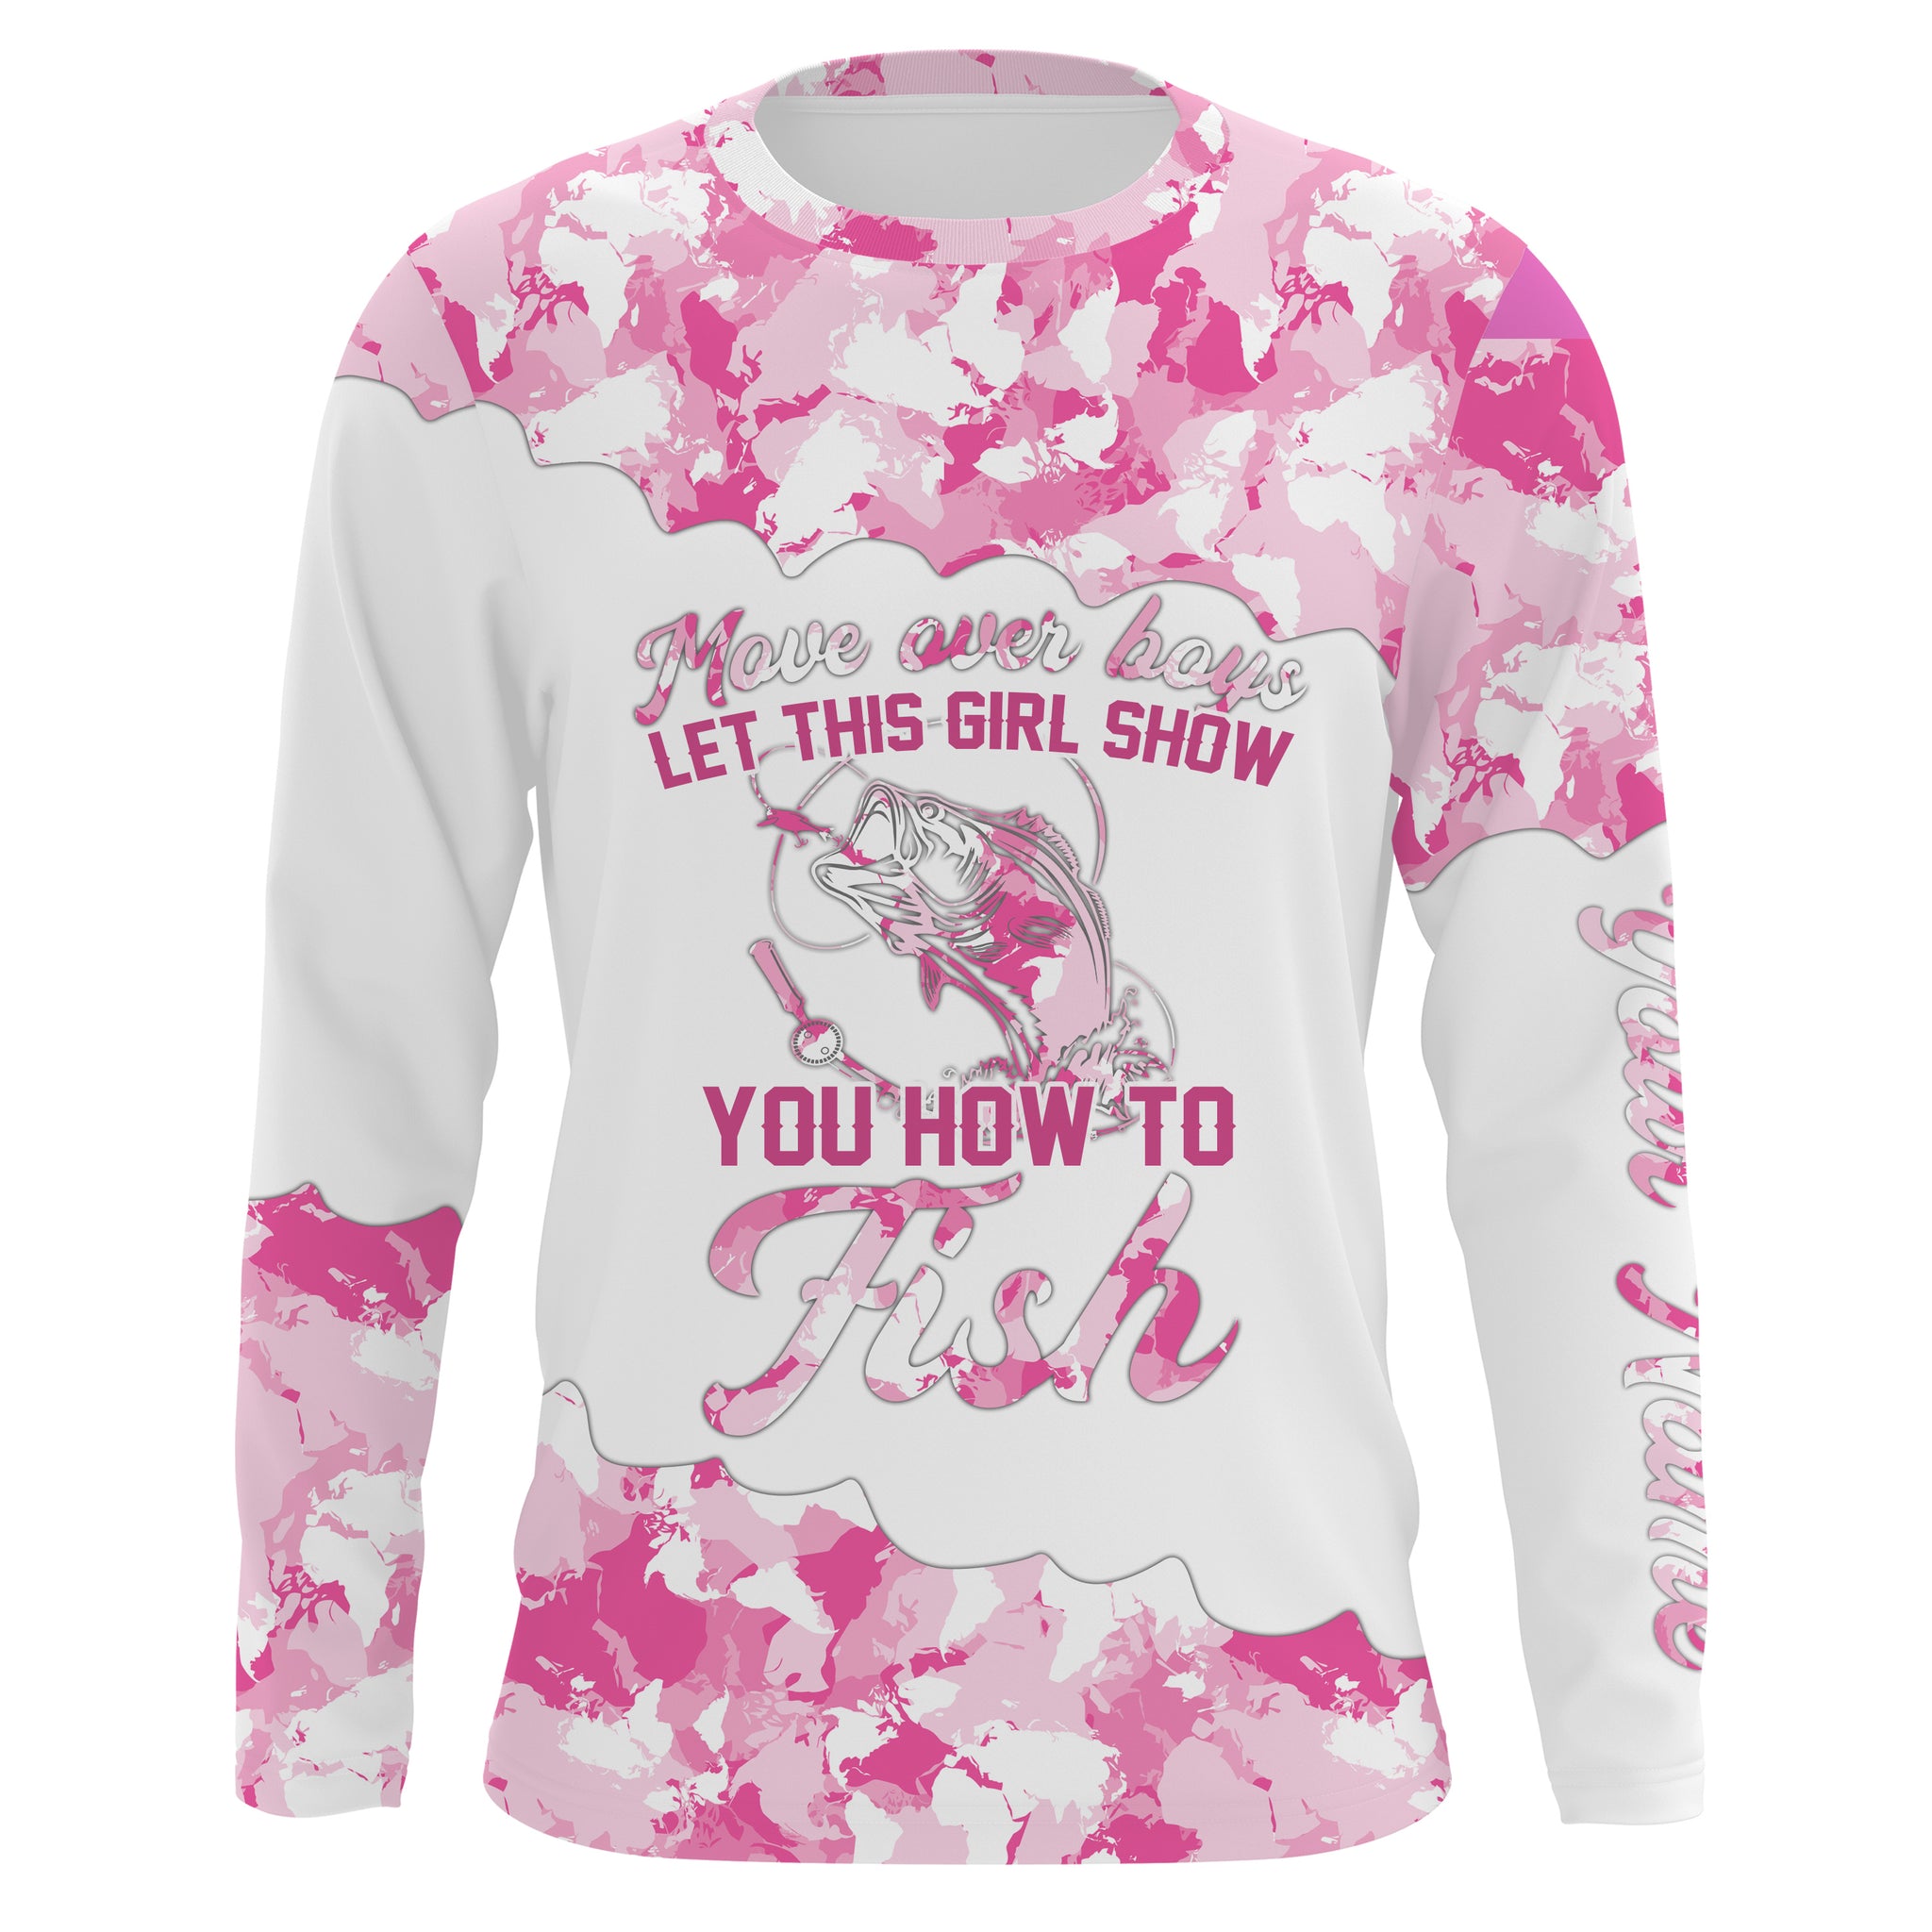 Pink Camo Let This Girl Show You How to Fish Girls Fishing Shirts for Women Long Sleeve UV Protection Custom Name UPF 30+ NQS2482 Long Sleeves UPF +